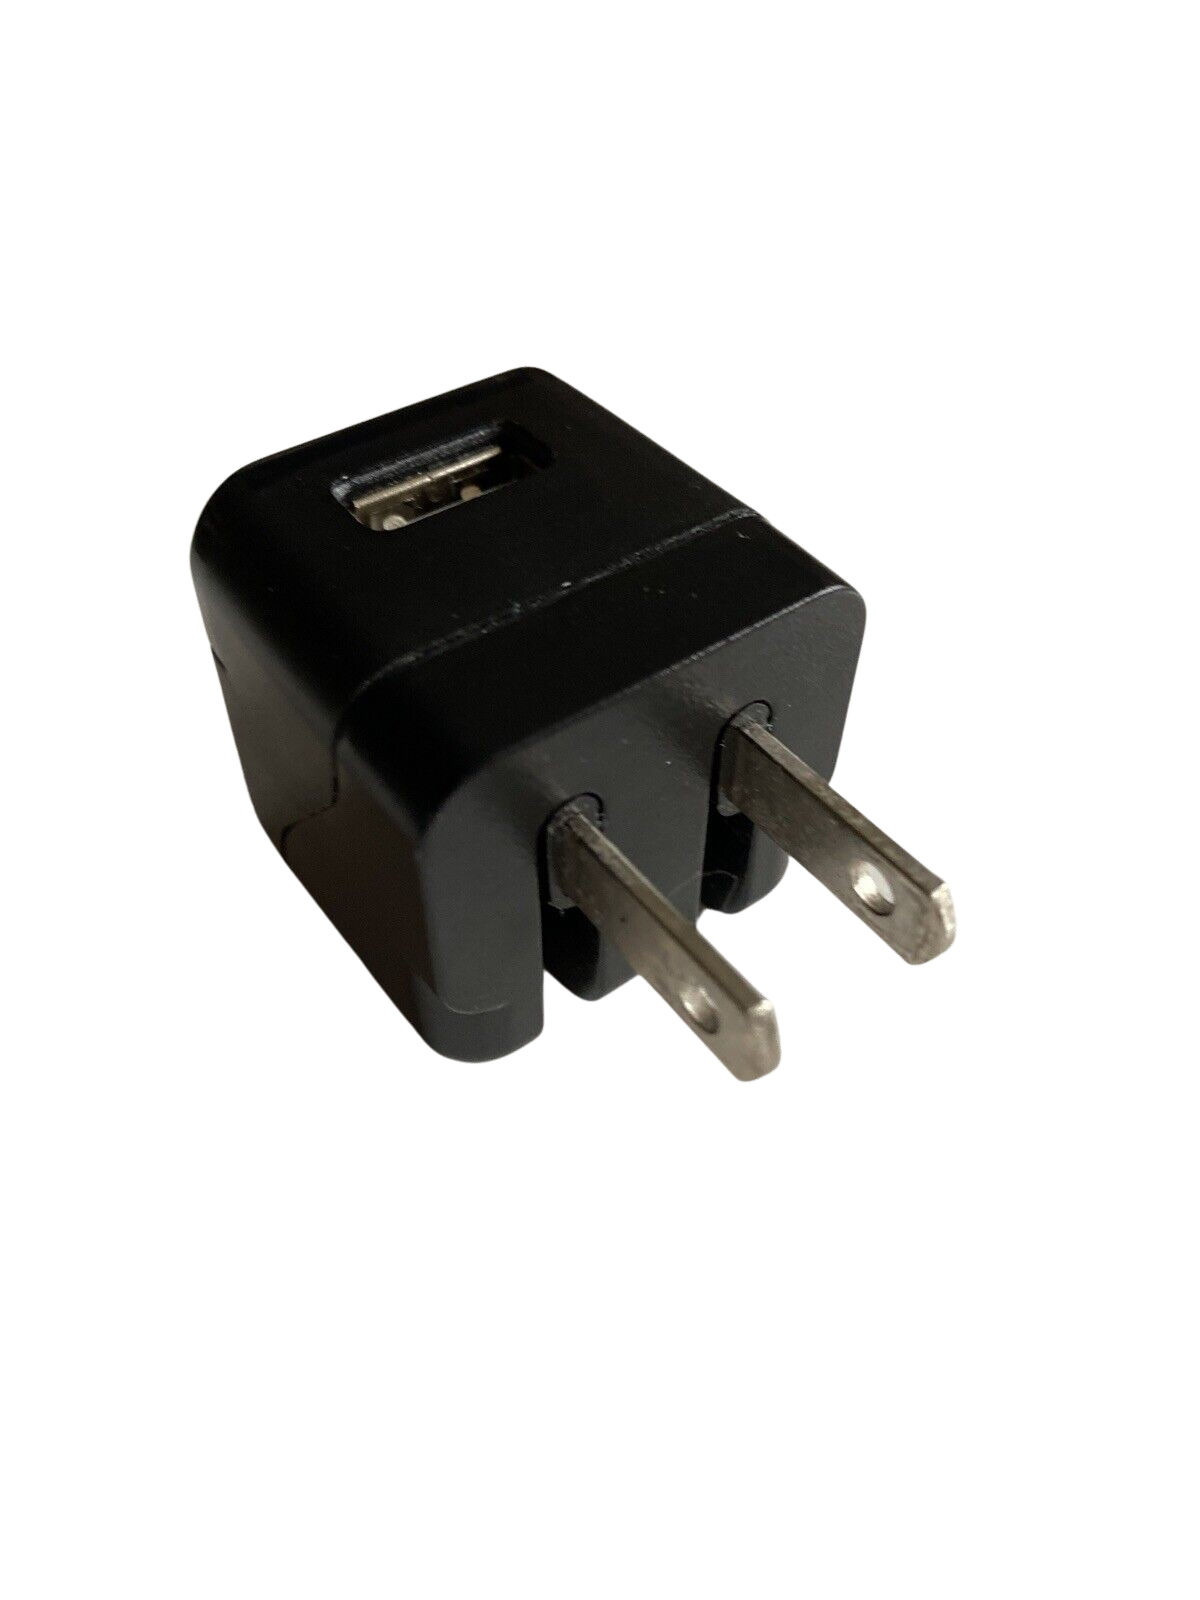 TWO-PACKS Duracell USB AC Travel AC Adapter